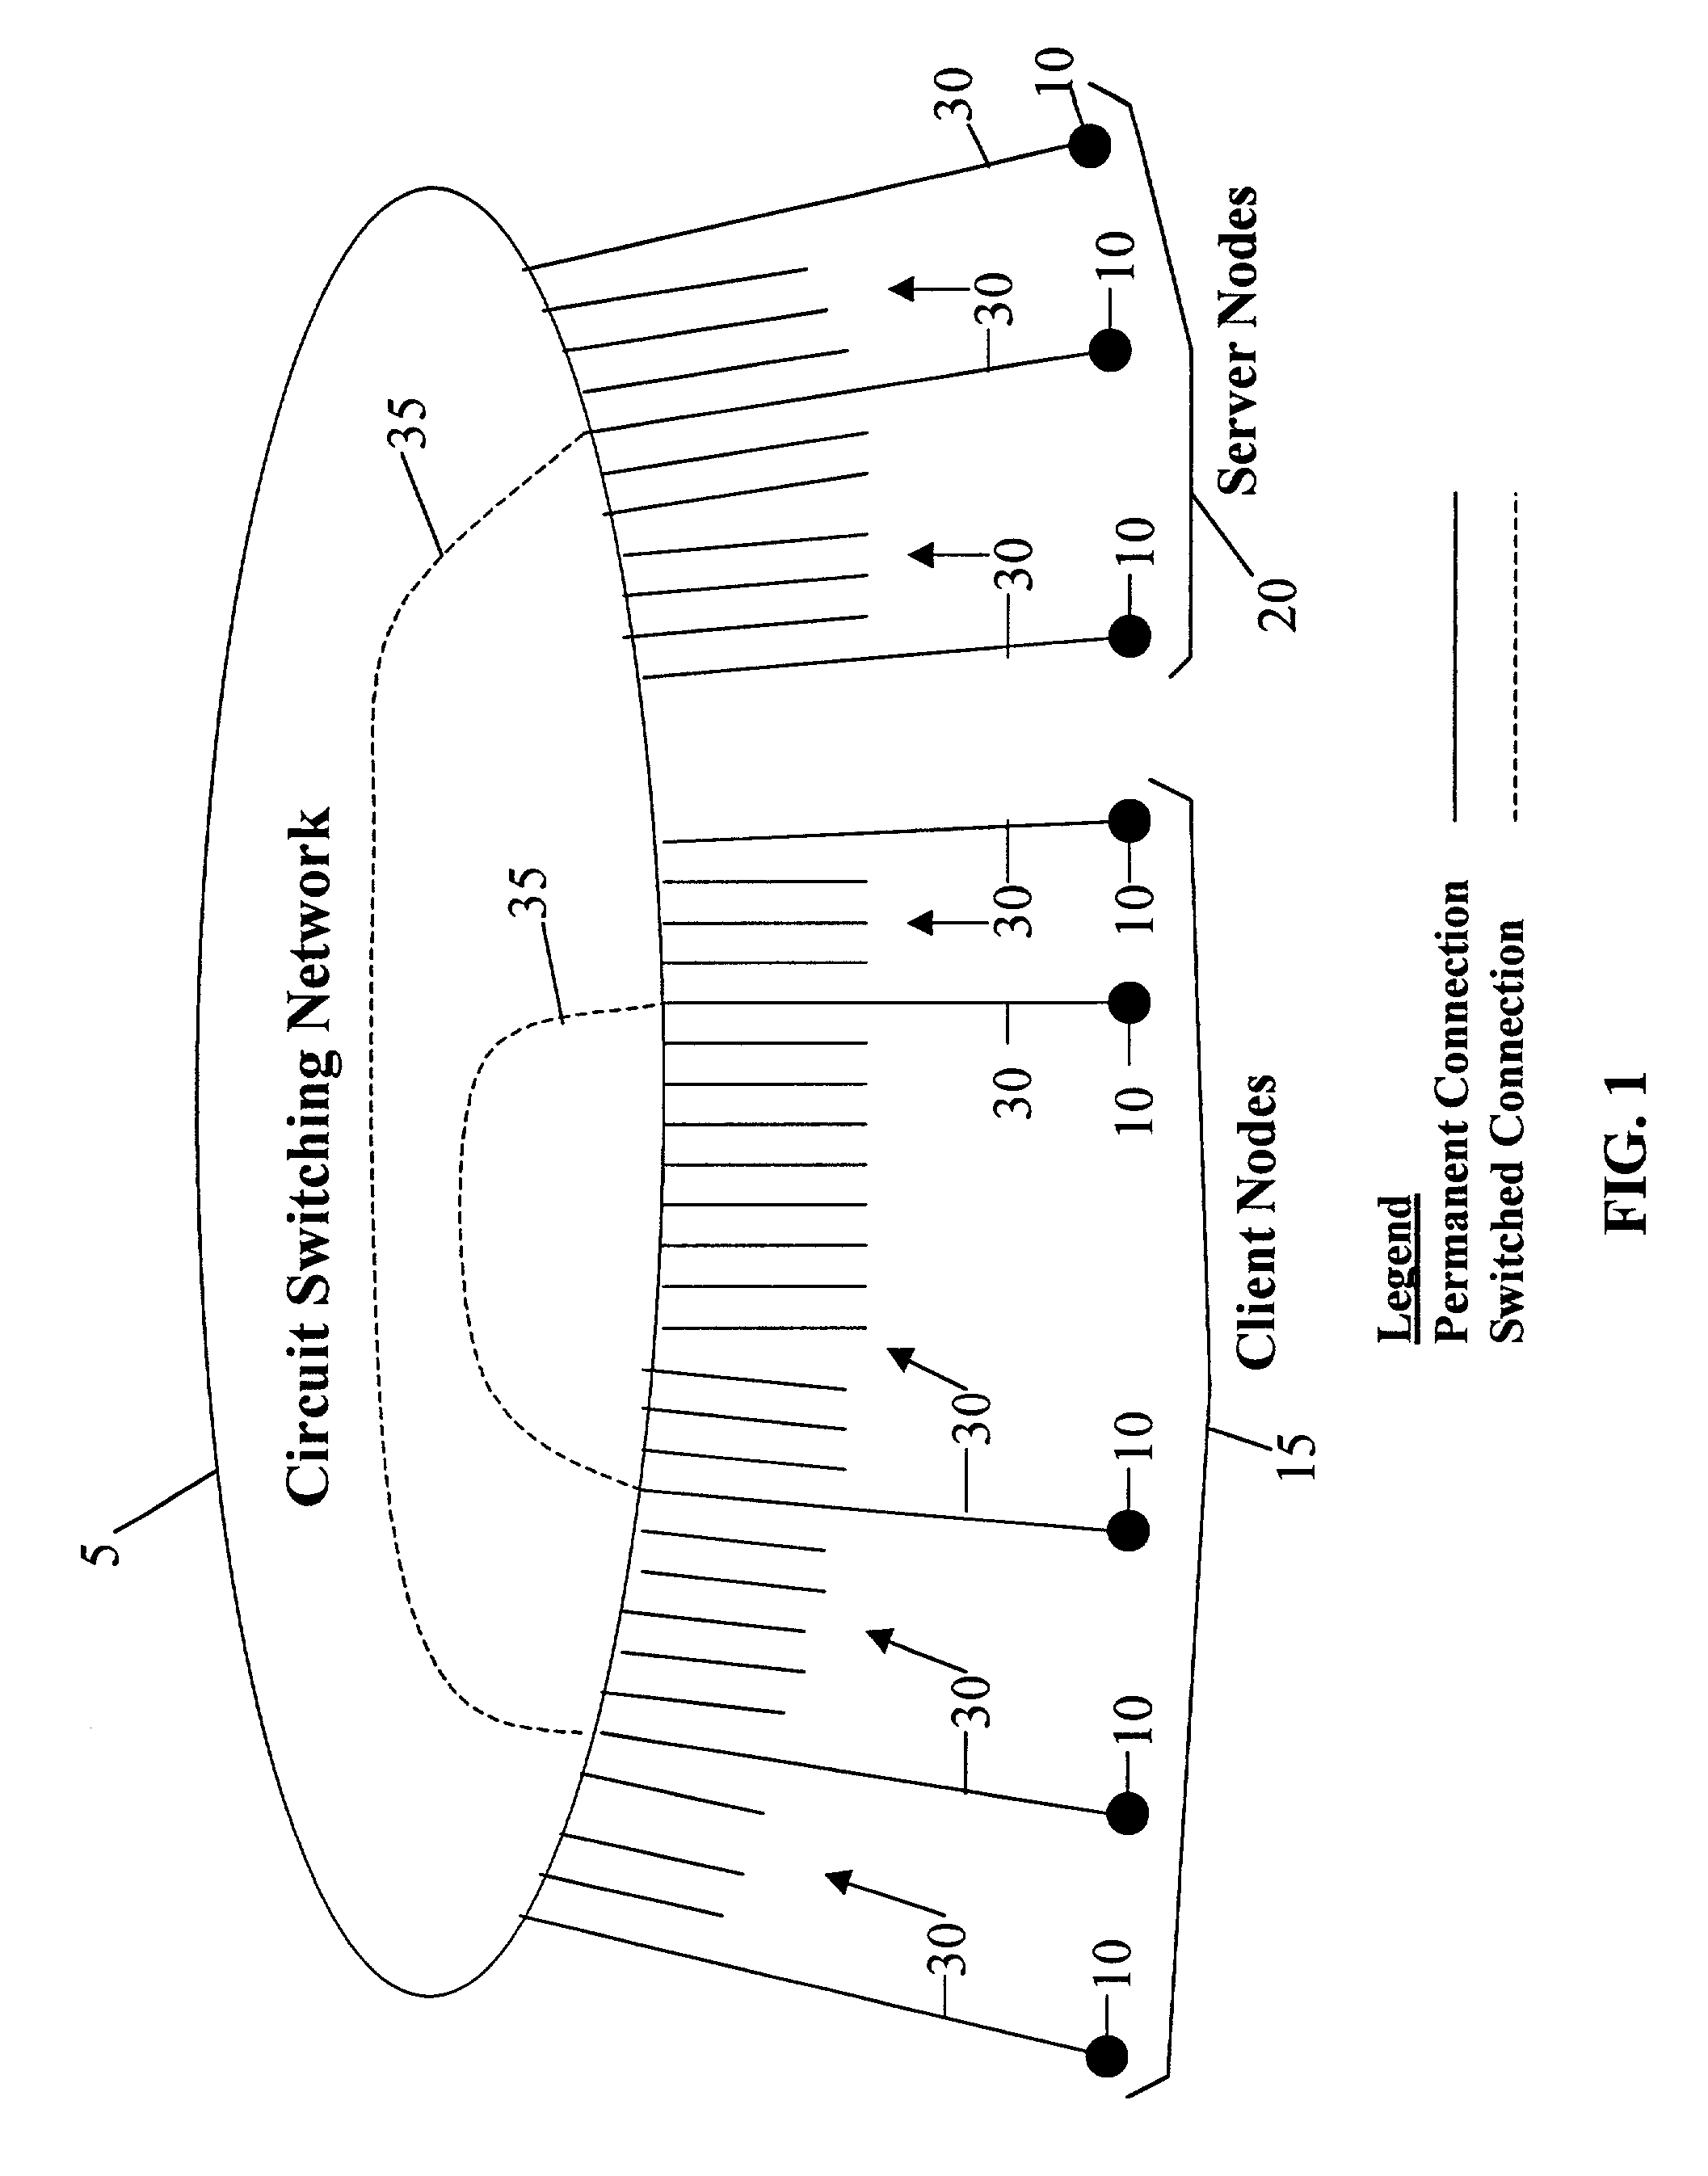 Wide area multi-service communications network based on dynamic channel switching